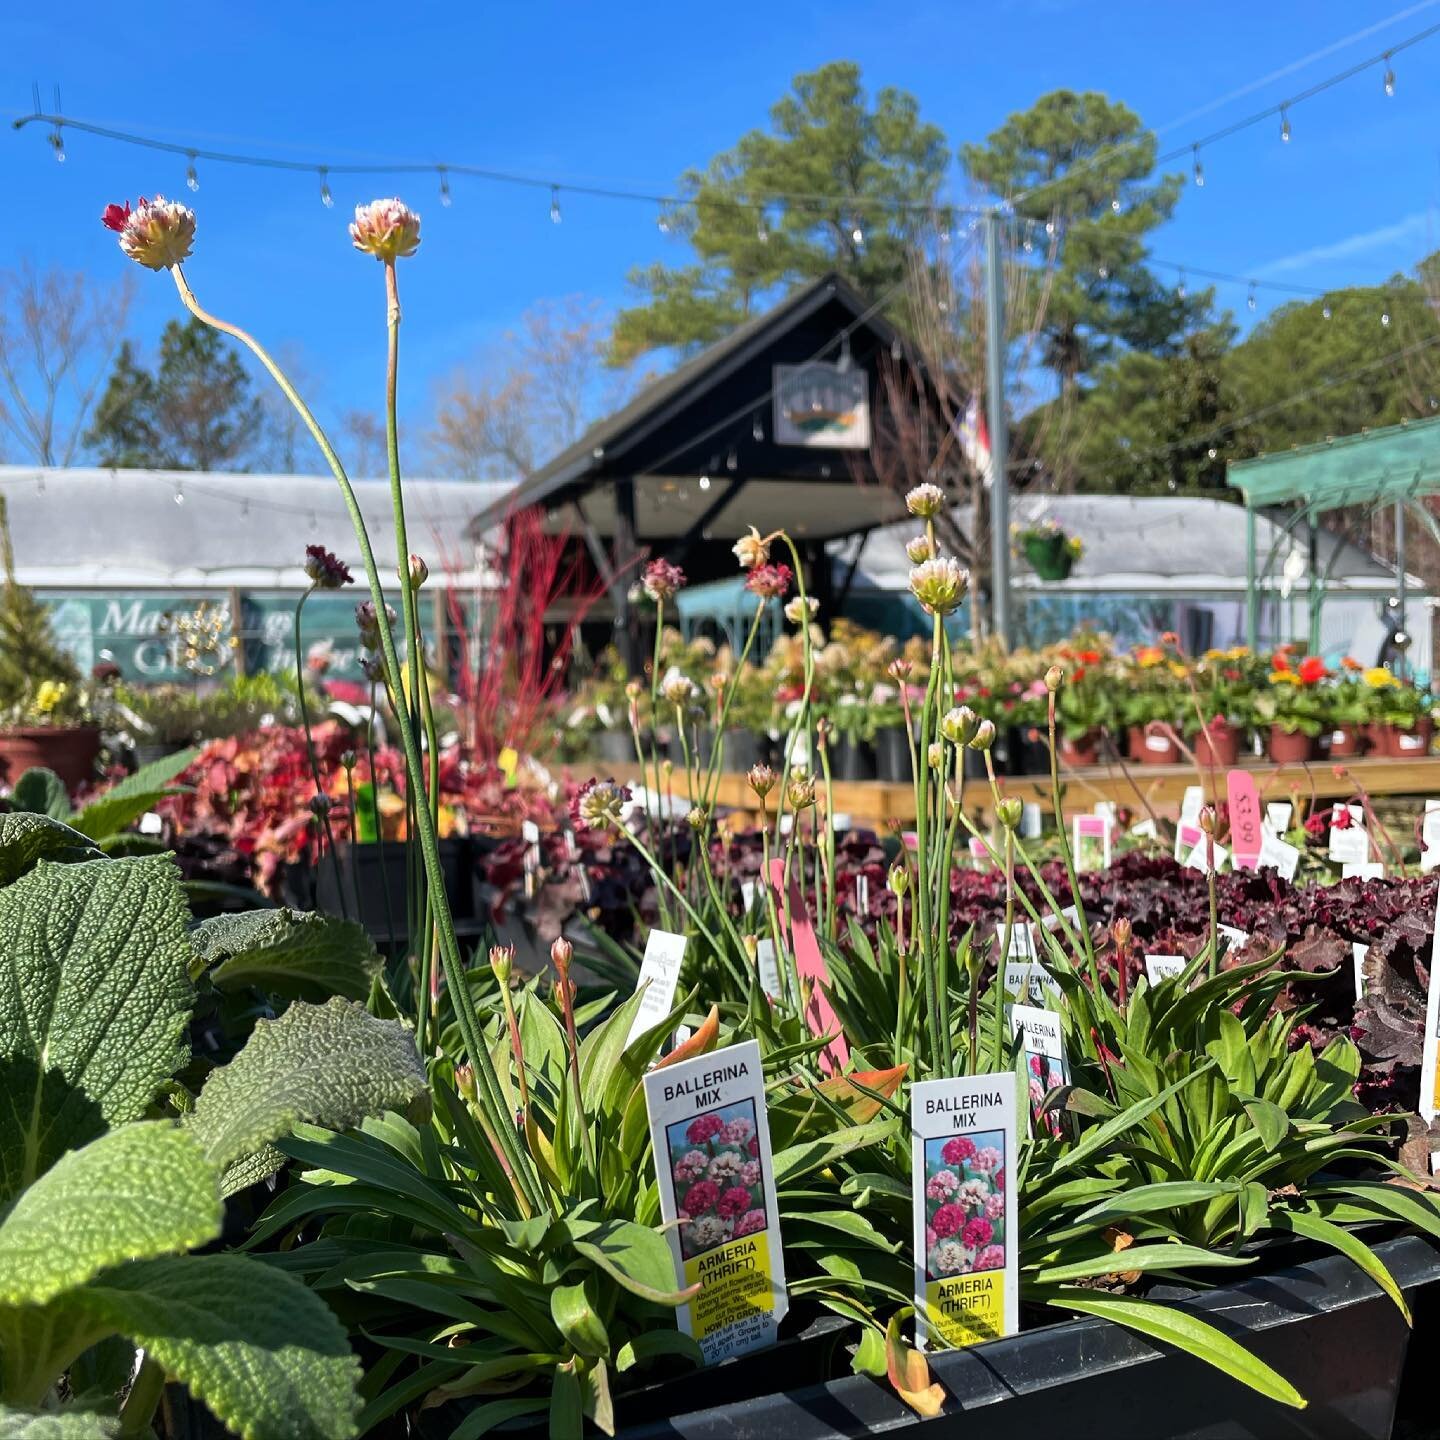 Measure, take pictures and find everything you need @gardensupplyco to refresh your beds, boxes, pots and planters this spring! Shop regular hours Mon-Fri 9am-6pm, Saturday 8am-6pm, Sunday 11am-5pm &bull;
&bull;
&bull;
&bull; 
#cary #apex #raleigh #d